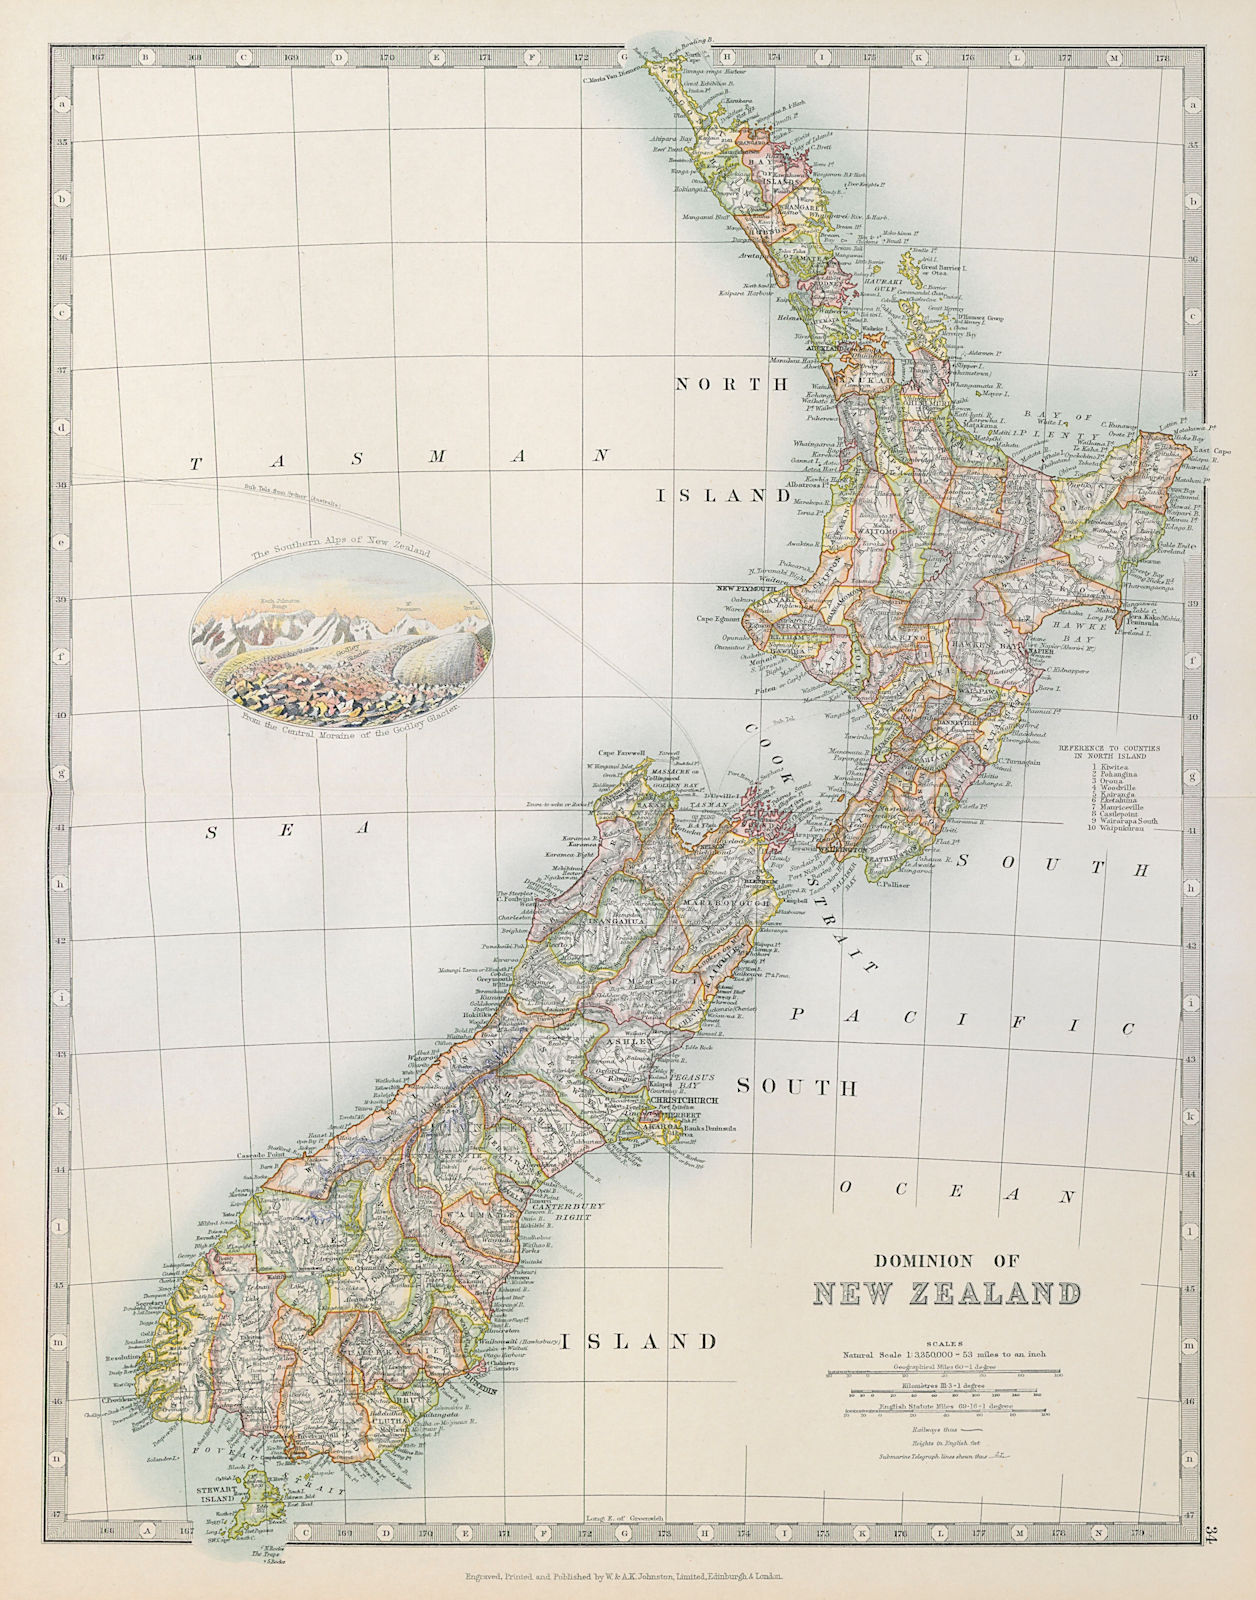 DOMINION OF NEW ZEALAND in counties. Godley Glacier vignette. JOHNSTON 1915 map